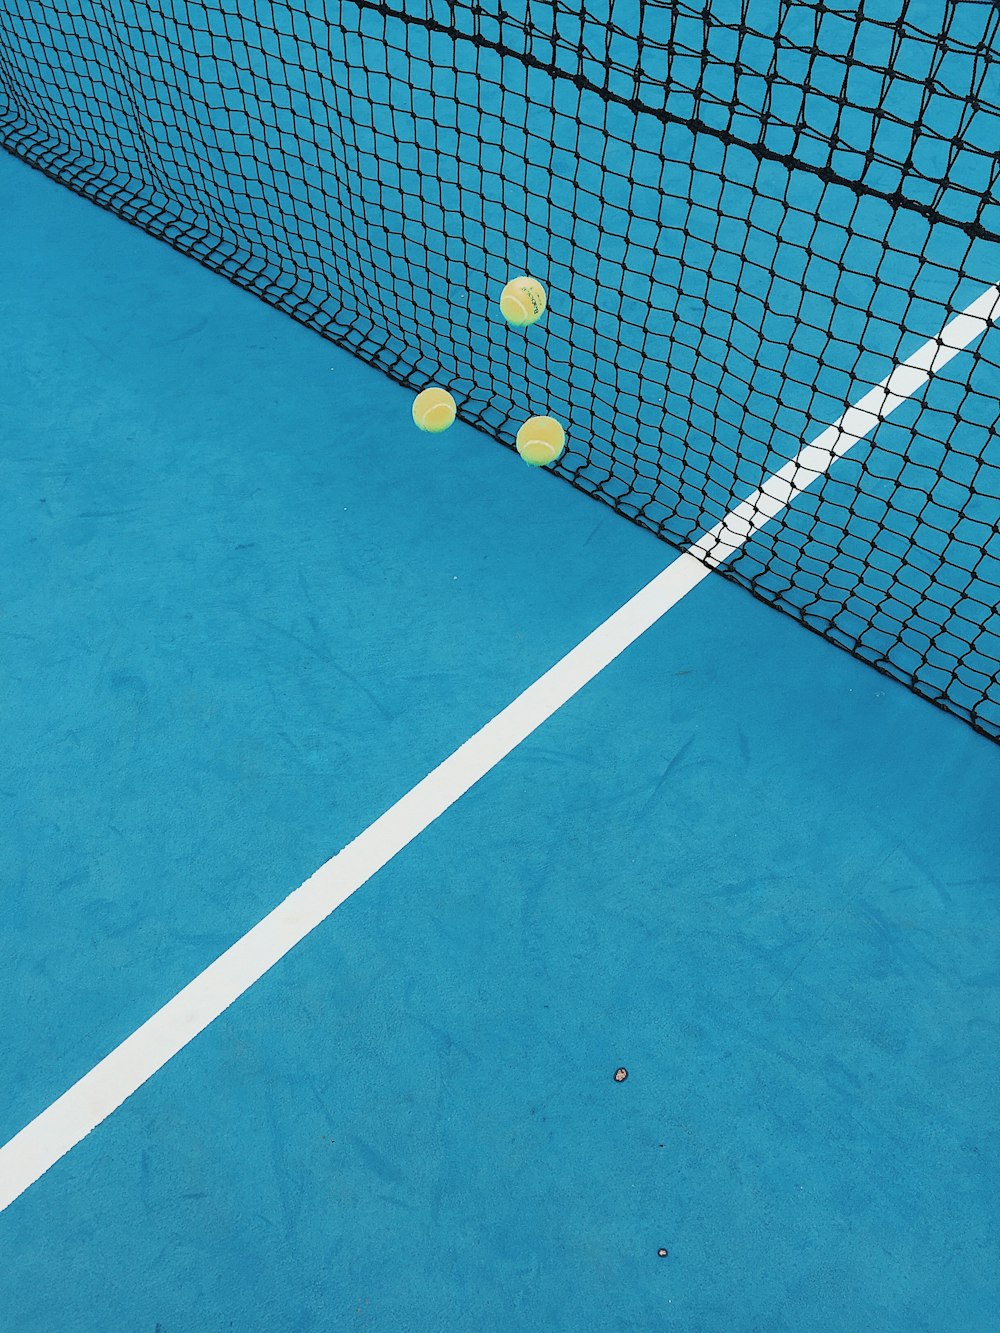 a tennis court with three tennis balls on it